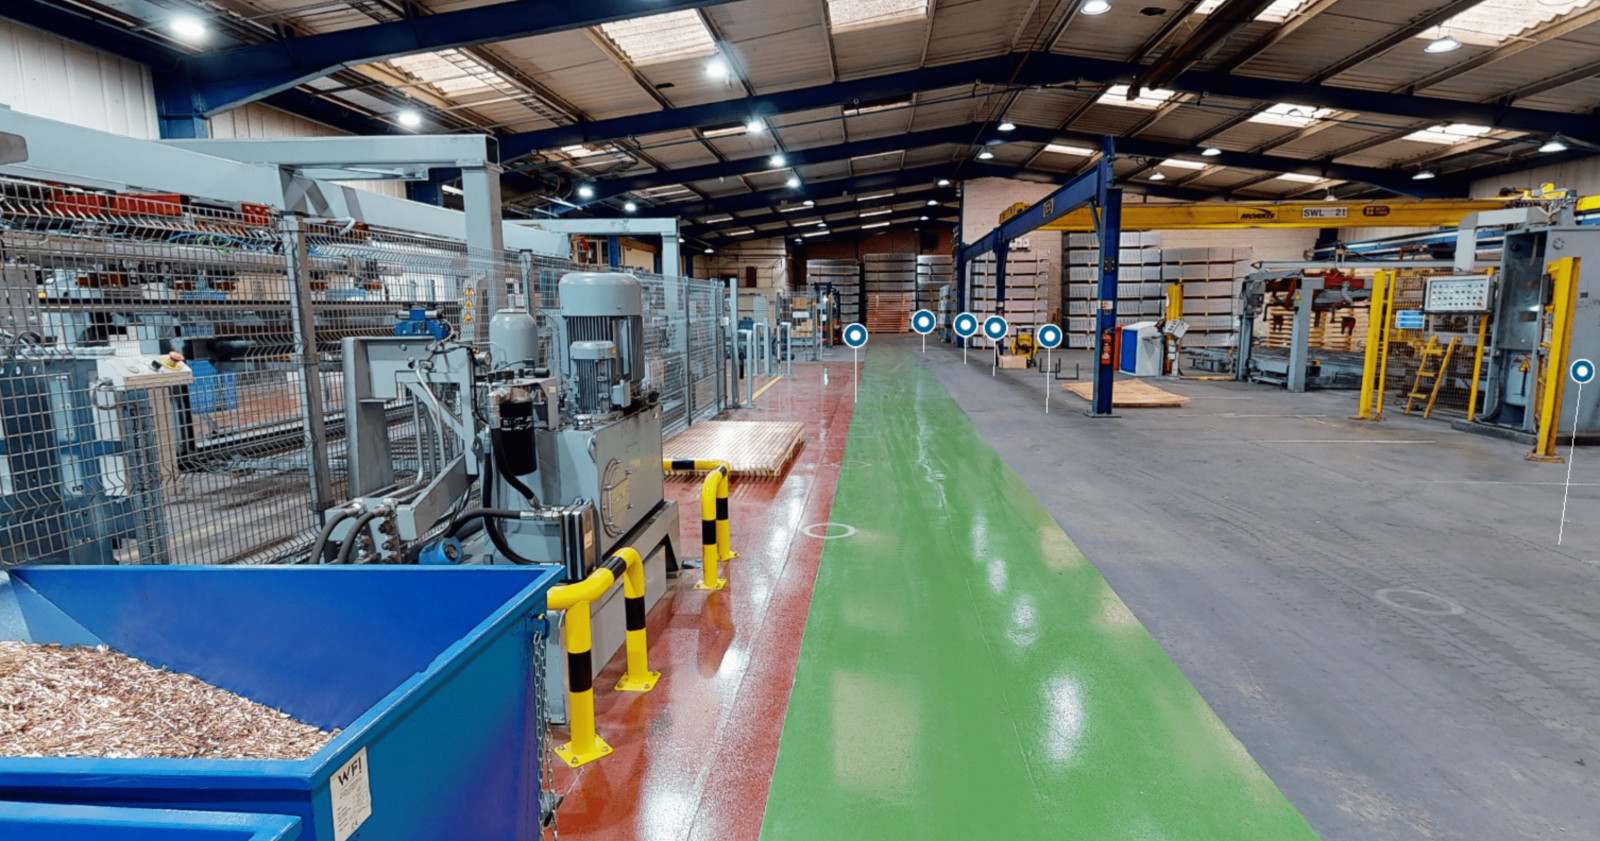 Tour in Focus: The UK's Largest Manufacturer of Industrial Welded Mesh